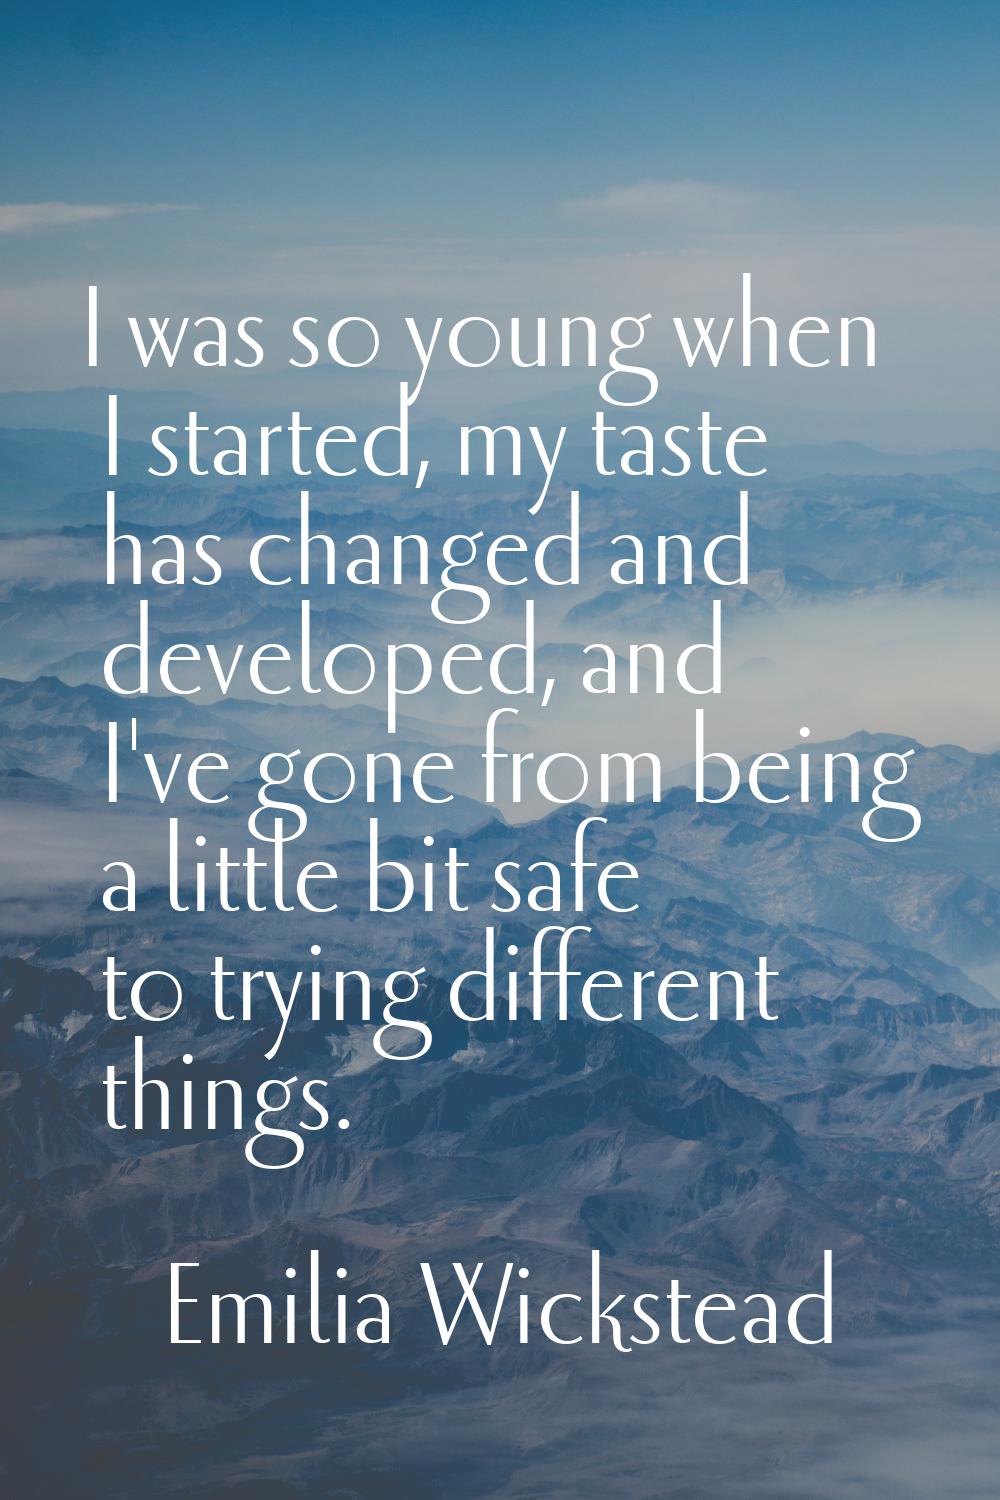 I was so young when I started, my taste has changed and developed, and I've gone from being a littl